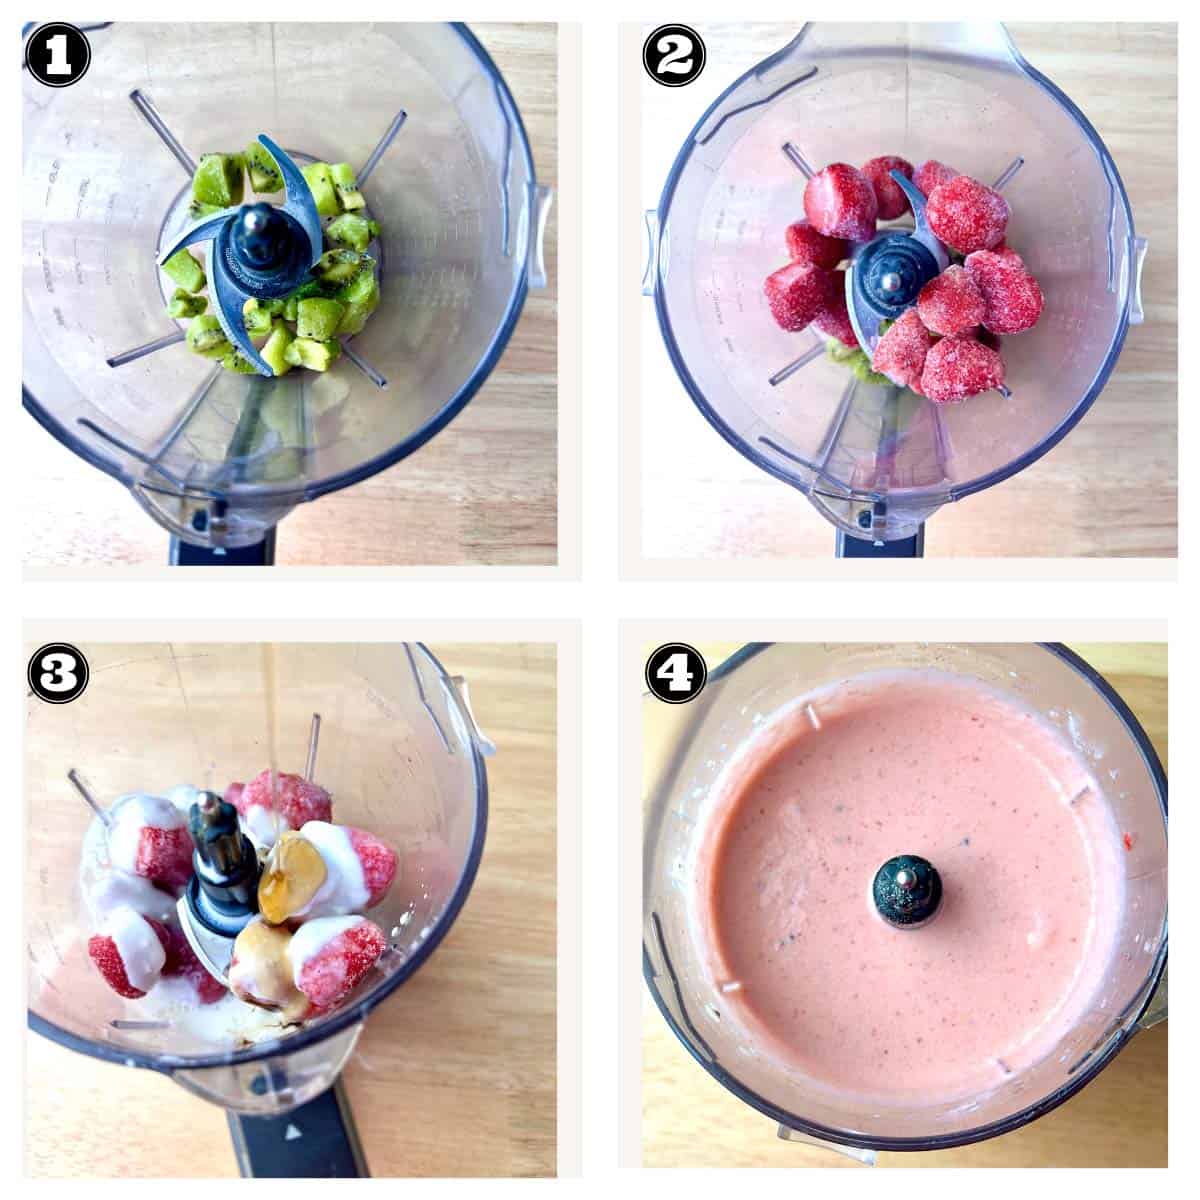 images showing the step-by-step process of making strawberry kiwi quencher smoothie